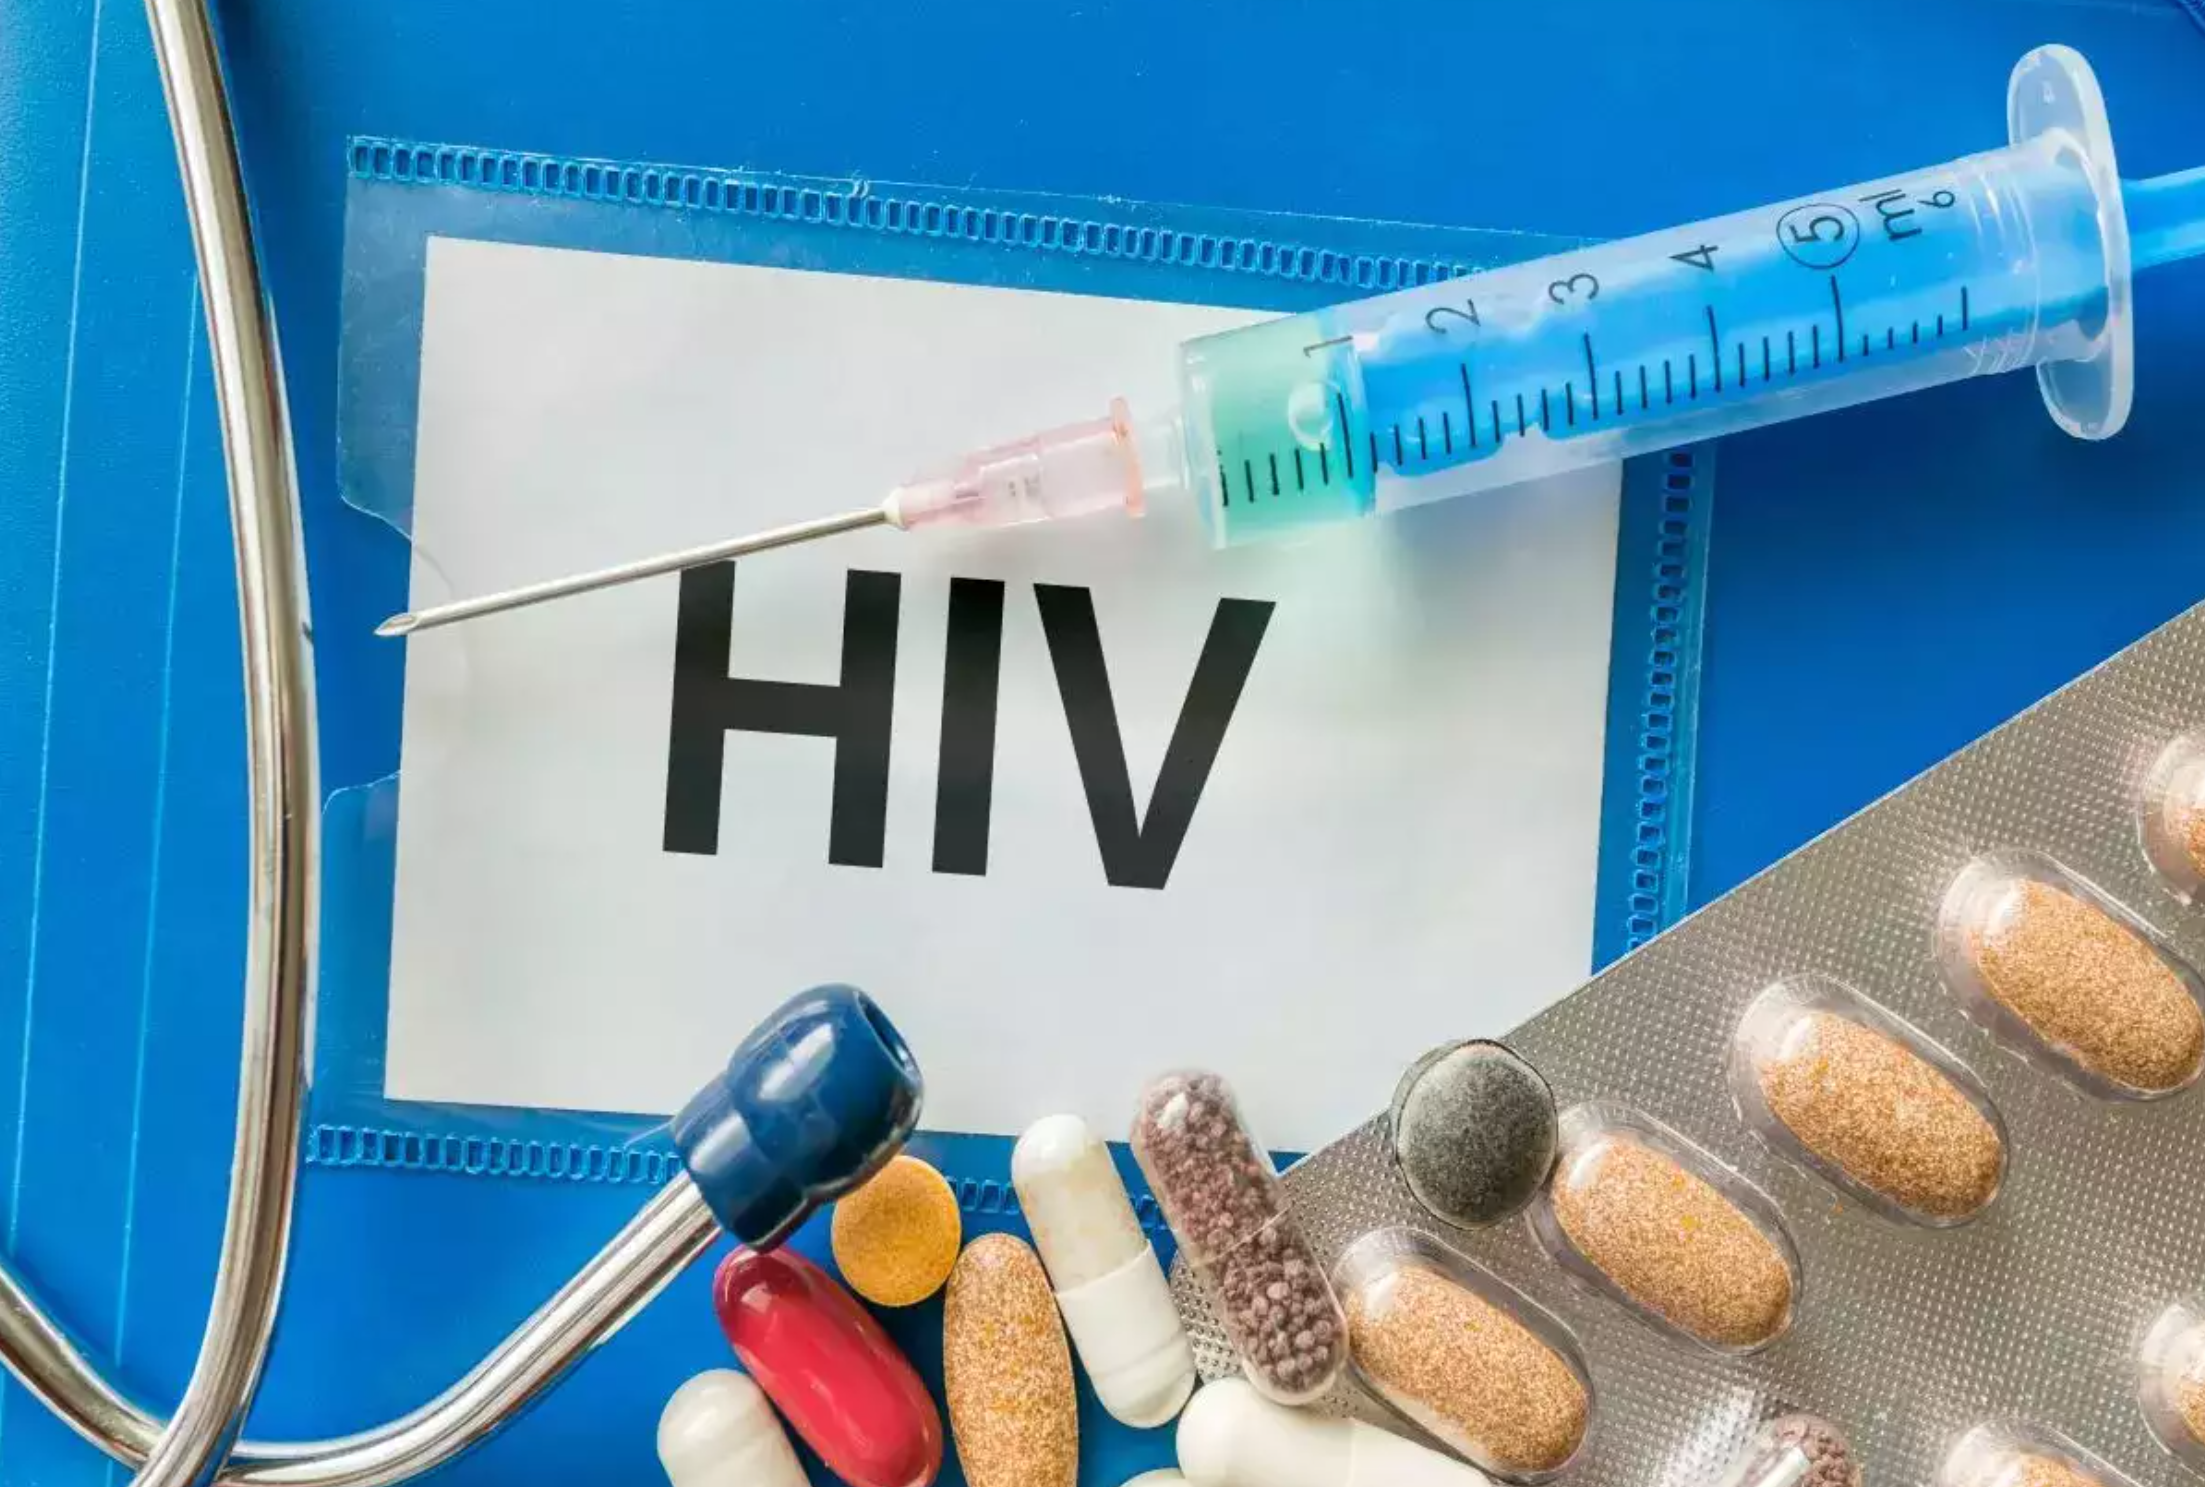 Trials suggest scientists are closer than ever to developing an immunization regimen that could produce rare antibodies effective against a wide range of HIV strains.